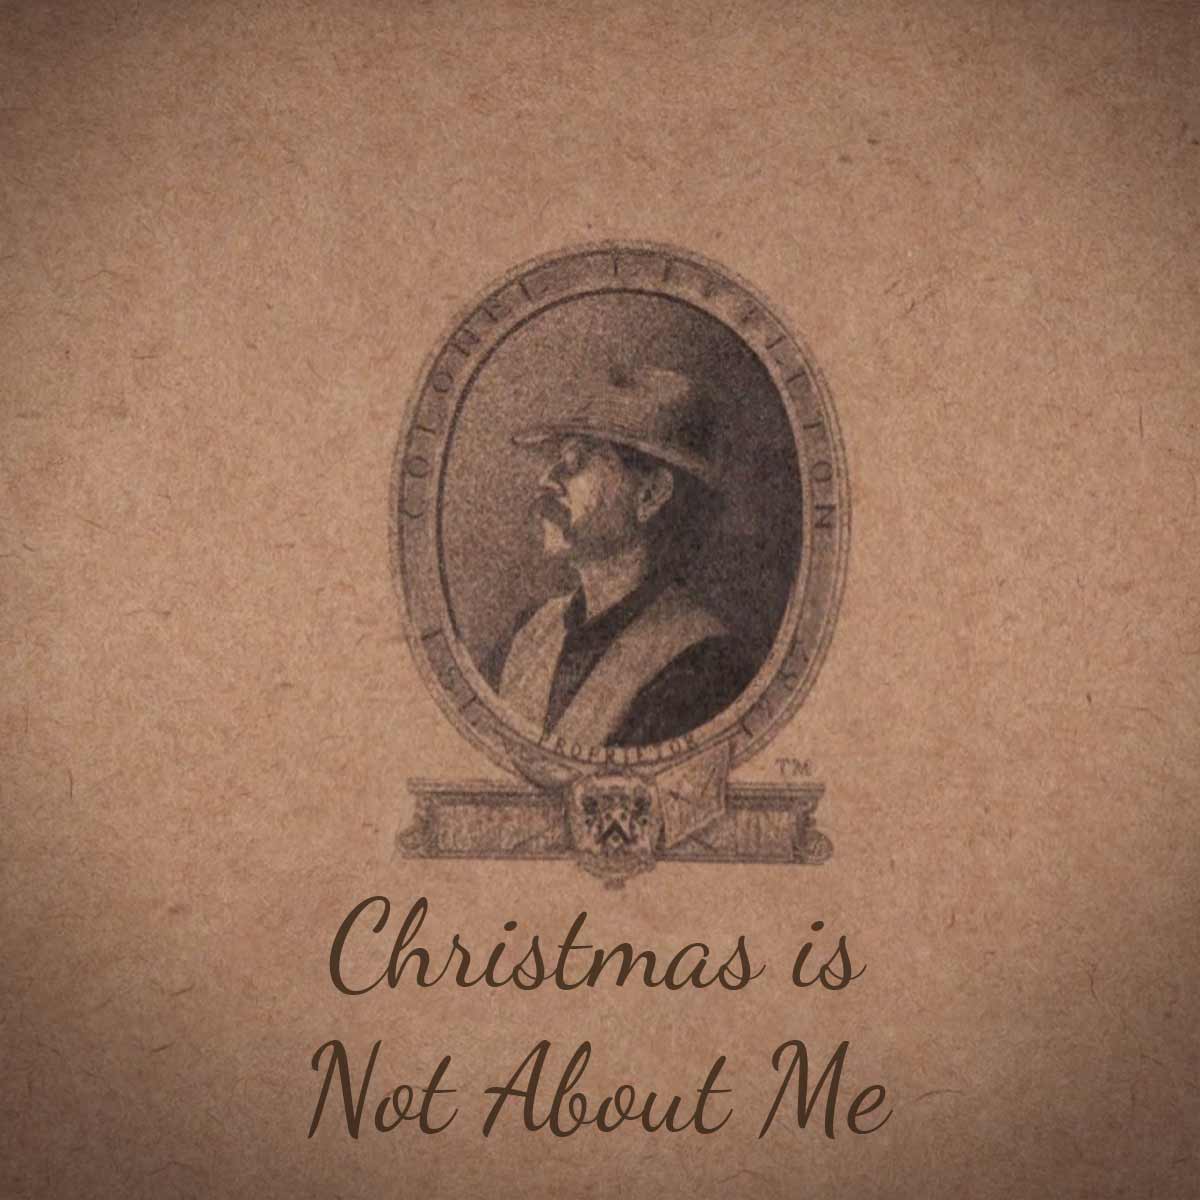 (Thumbnail feature image) "Christmas is Not About Me"